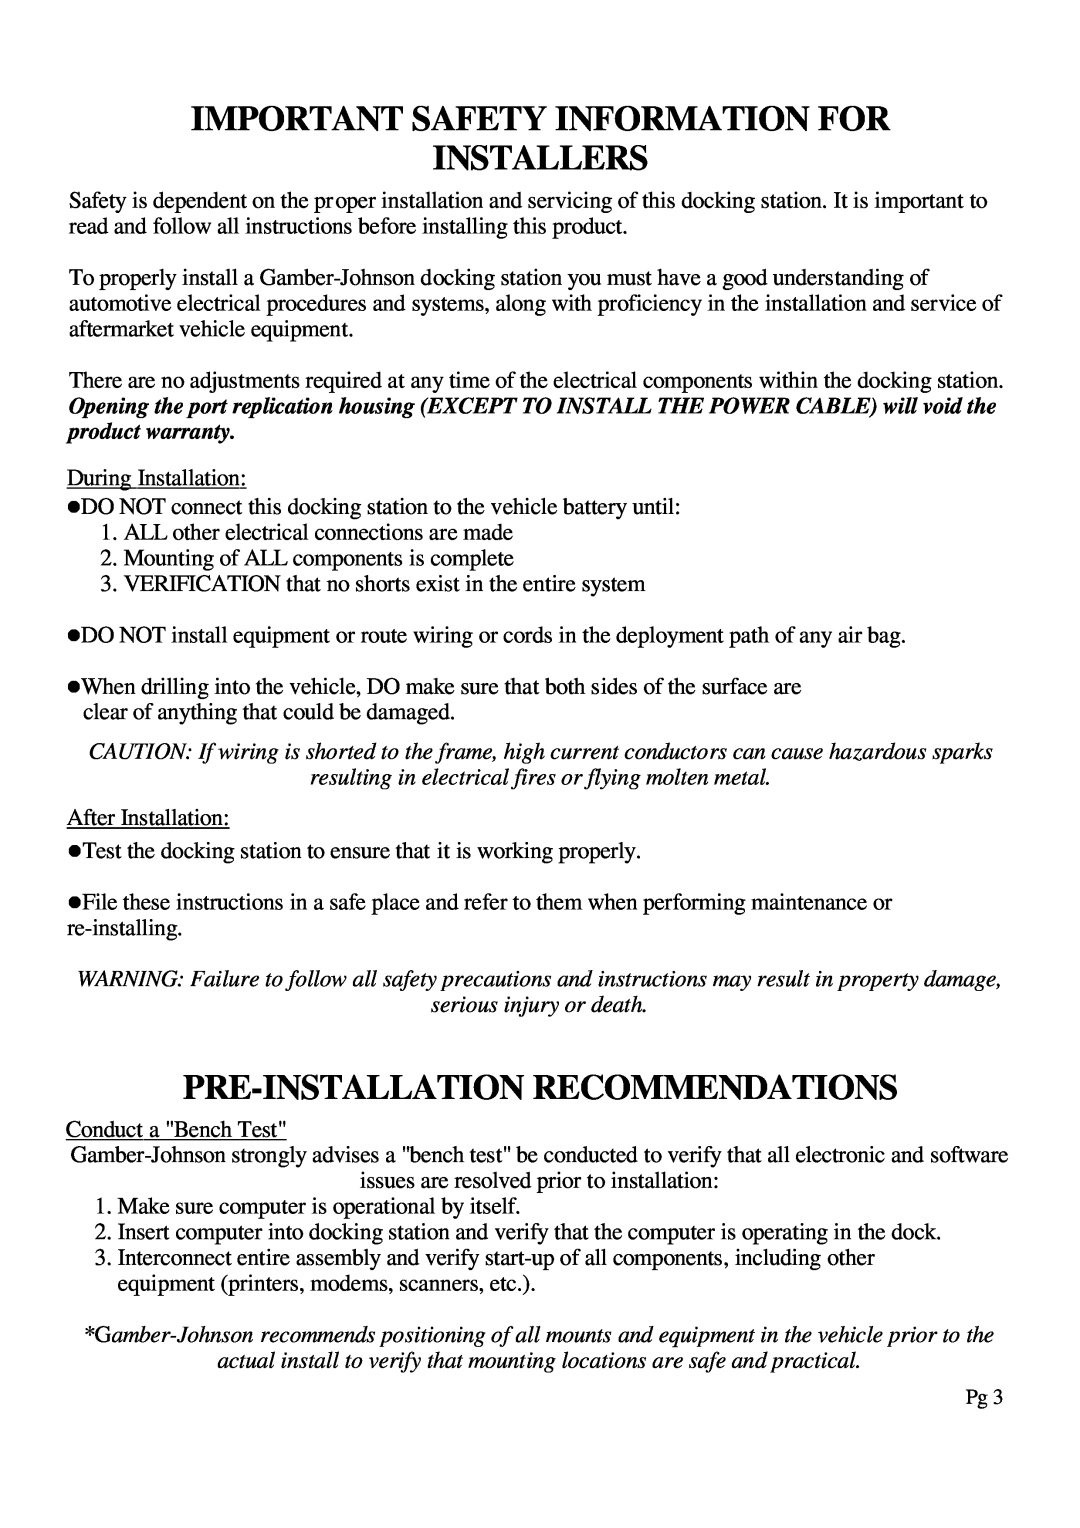 Gamber Johnson 7160-0318-12, CF-31 Important Safety Information For Installers, Pre-Installation Recommendations 